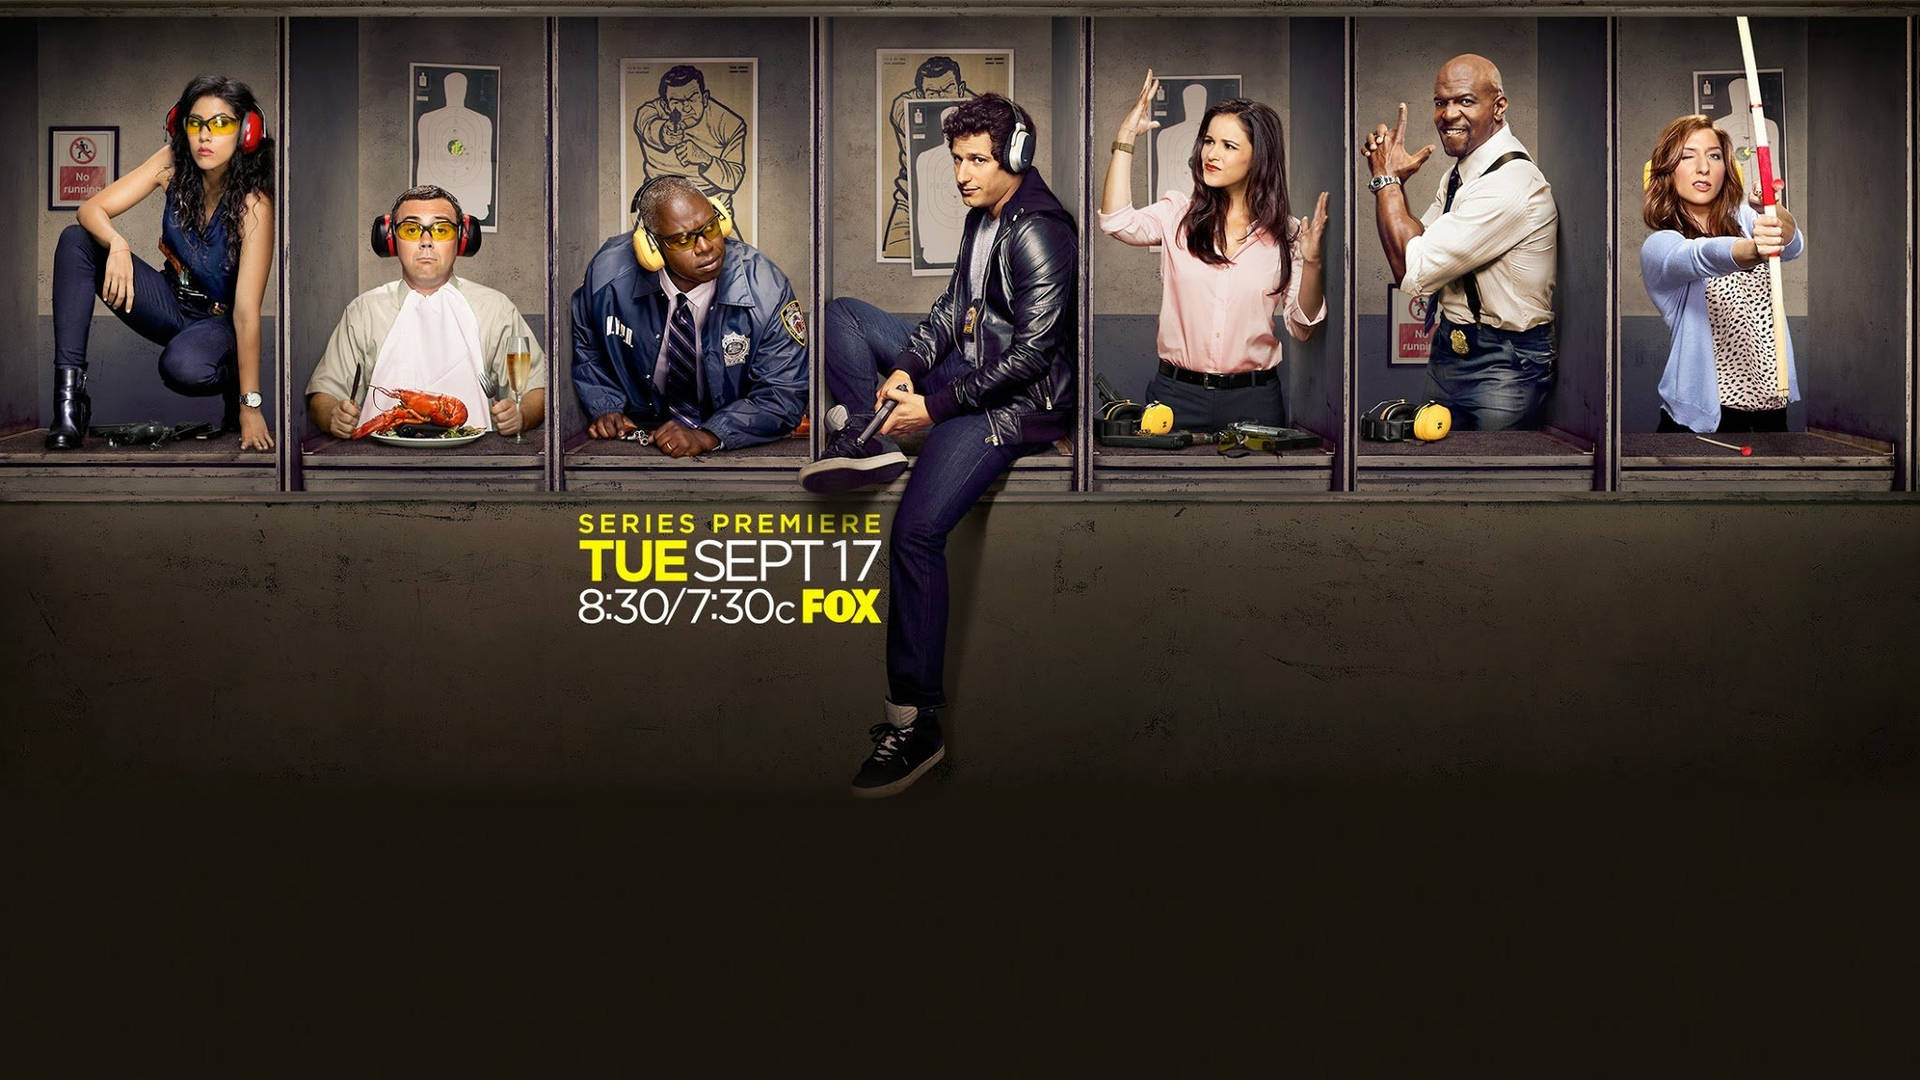 "Ready to join the squad? Watch 'Brooklyn Nine Nine' tonight on FOX!" Wallpaper